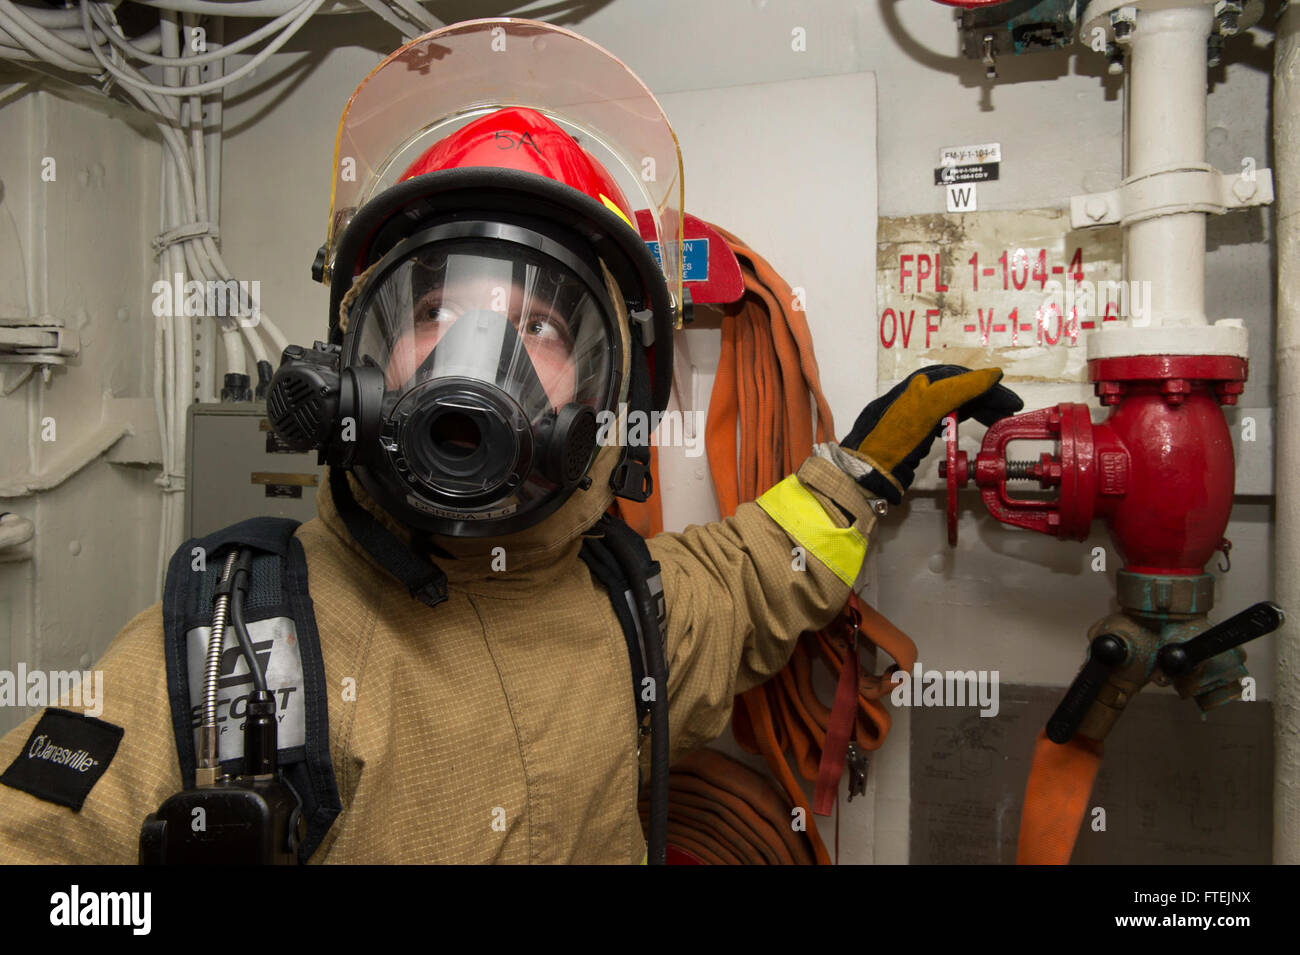 ATLANTIC OCEAN (Dec. 23, 2014) Hull Maintenance Technician Fireman Joseph Porter, from Allentown, Pennsylvania, mans a fire plug during a fire-fighting drill aboard the Wasp-class amphibious assault ship USS Iwo Jima (LHD 7) Dec. 23, 2014. The Iwo Jima Amphibious Ready Group/24th Marine Expeditionary Unit is conducting naval operations in the U.S. 6th Fleet area of operations in support of U.S. national security interests in Europe. Stock Photo